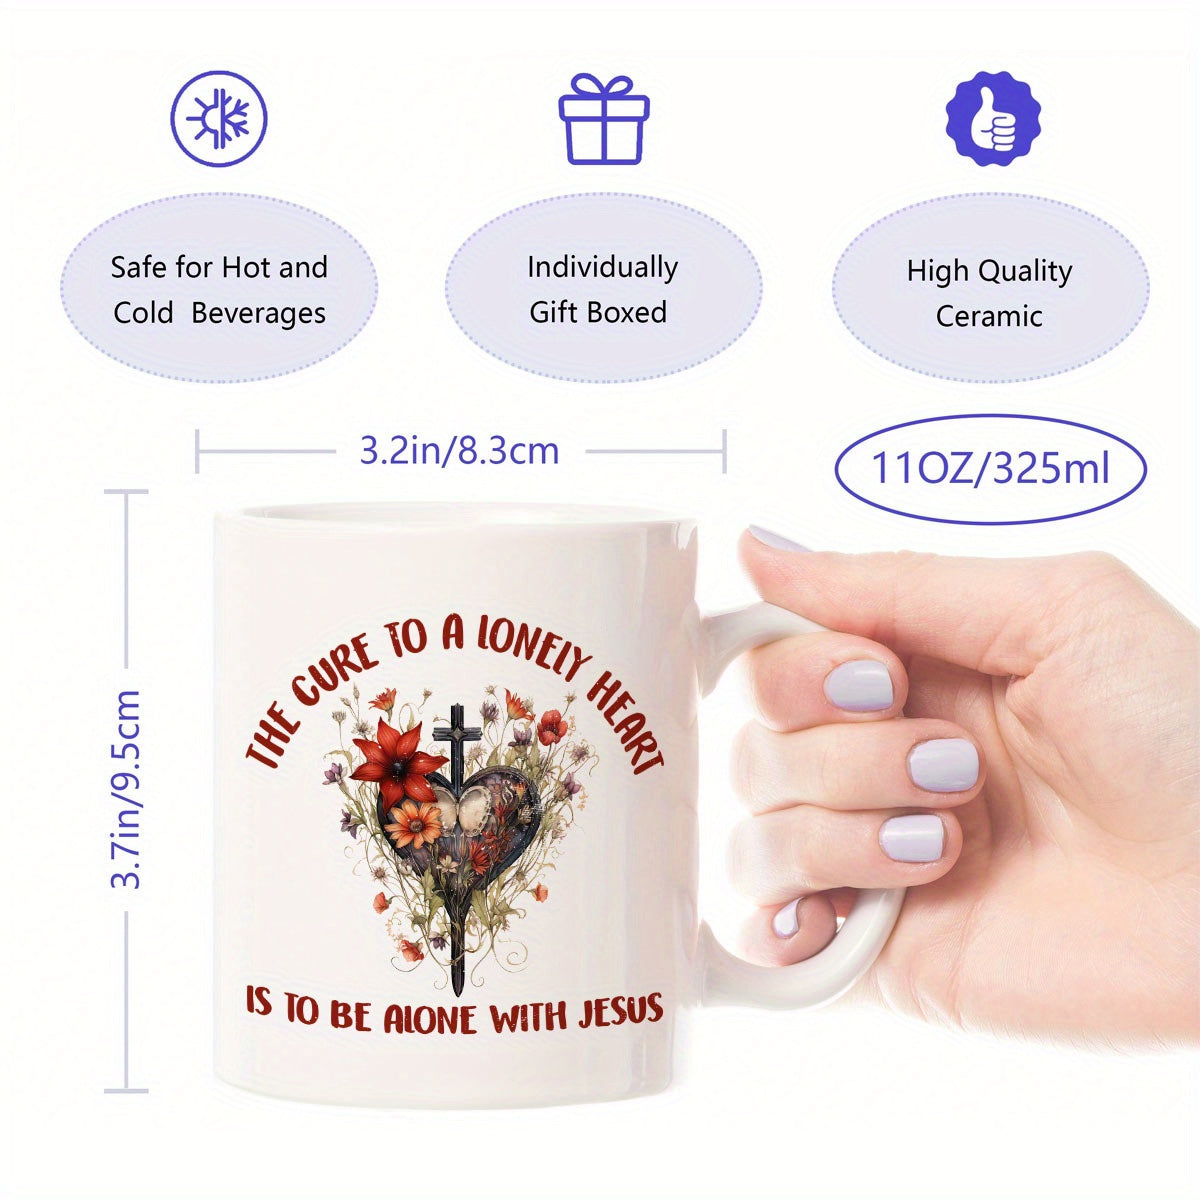 The Cure To A Lonely Heart Is To Be Alone With Jesus Christian White Ceramic Mug, 11oz claimedbygoddesigns